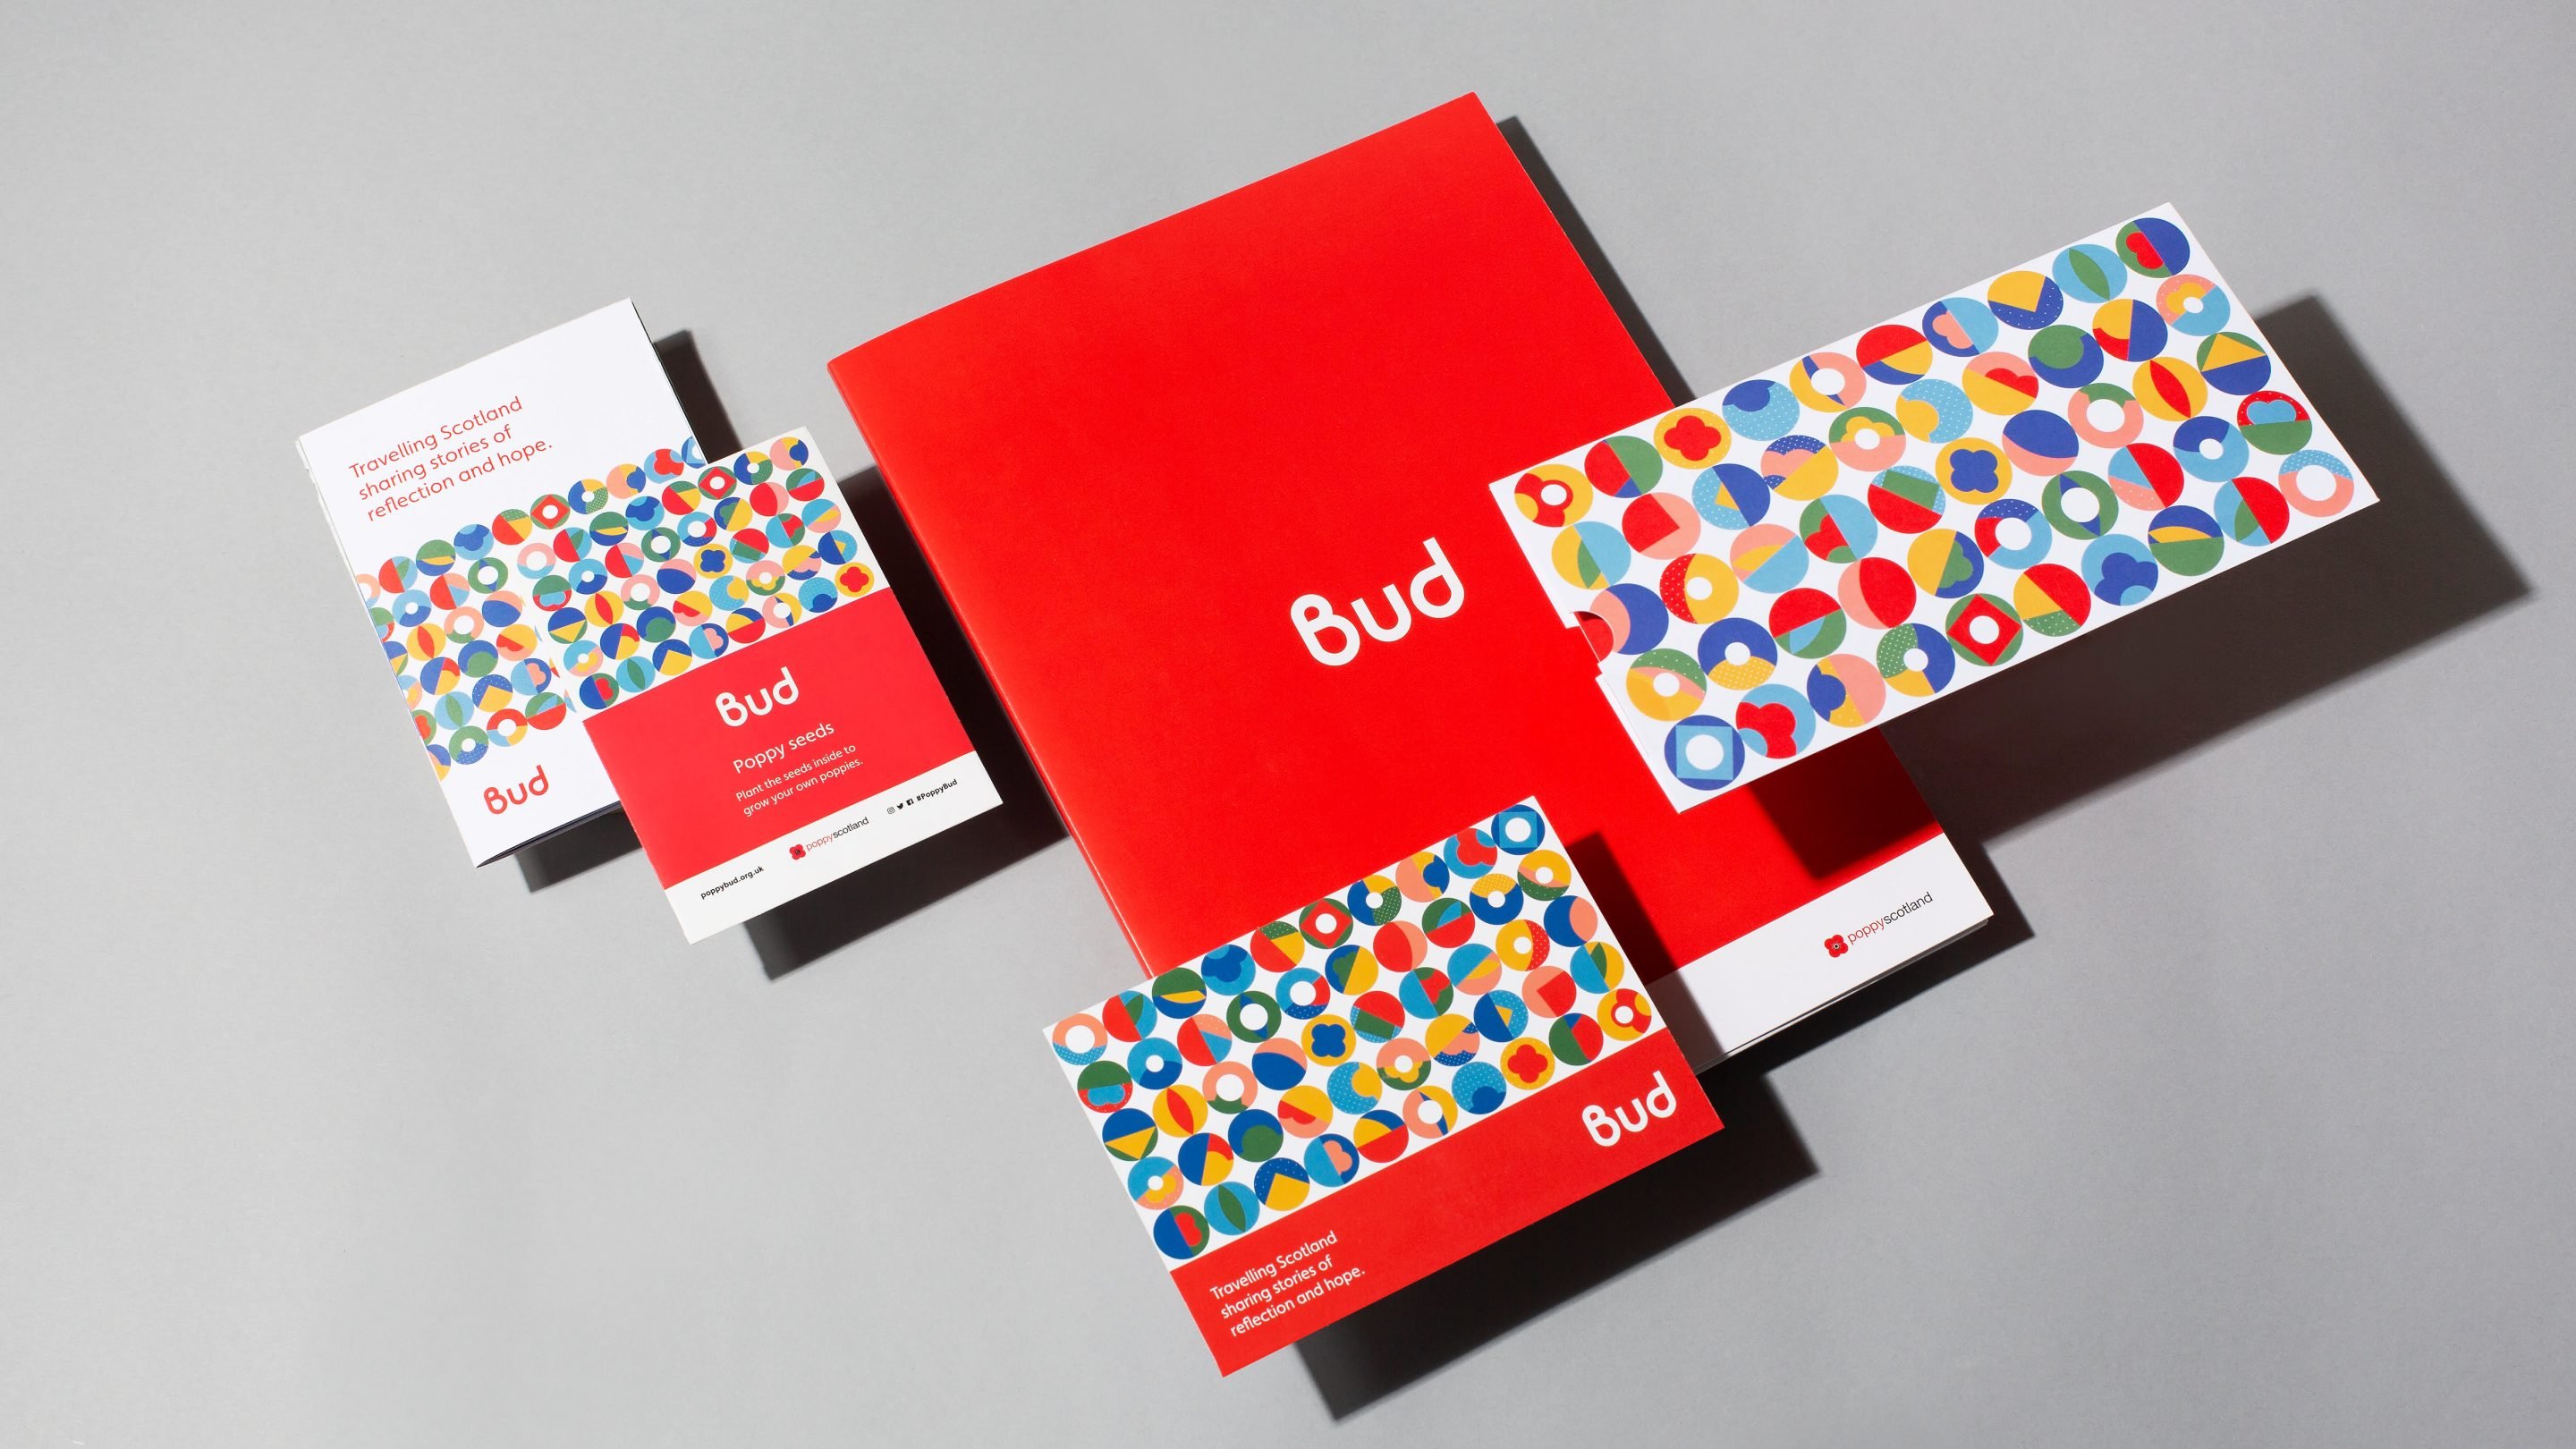 Bud brand collateral